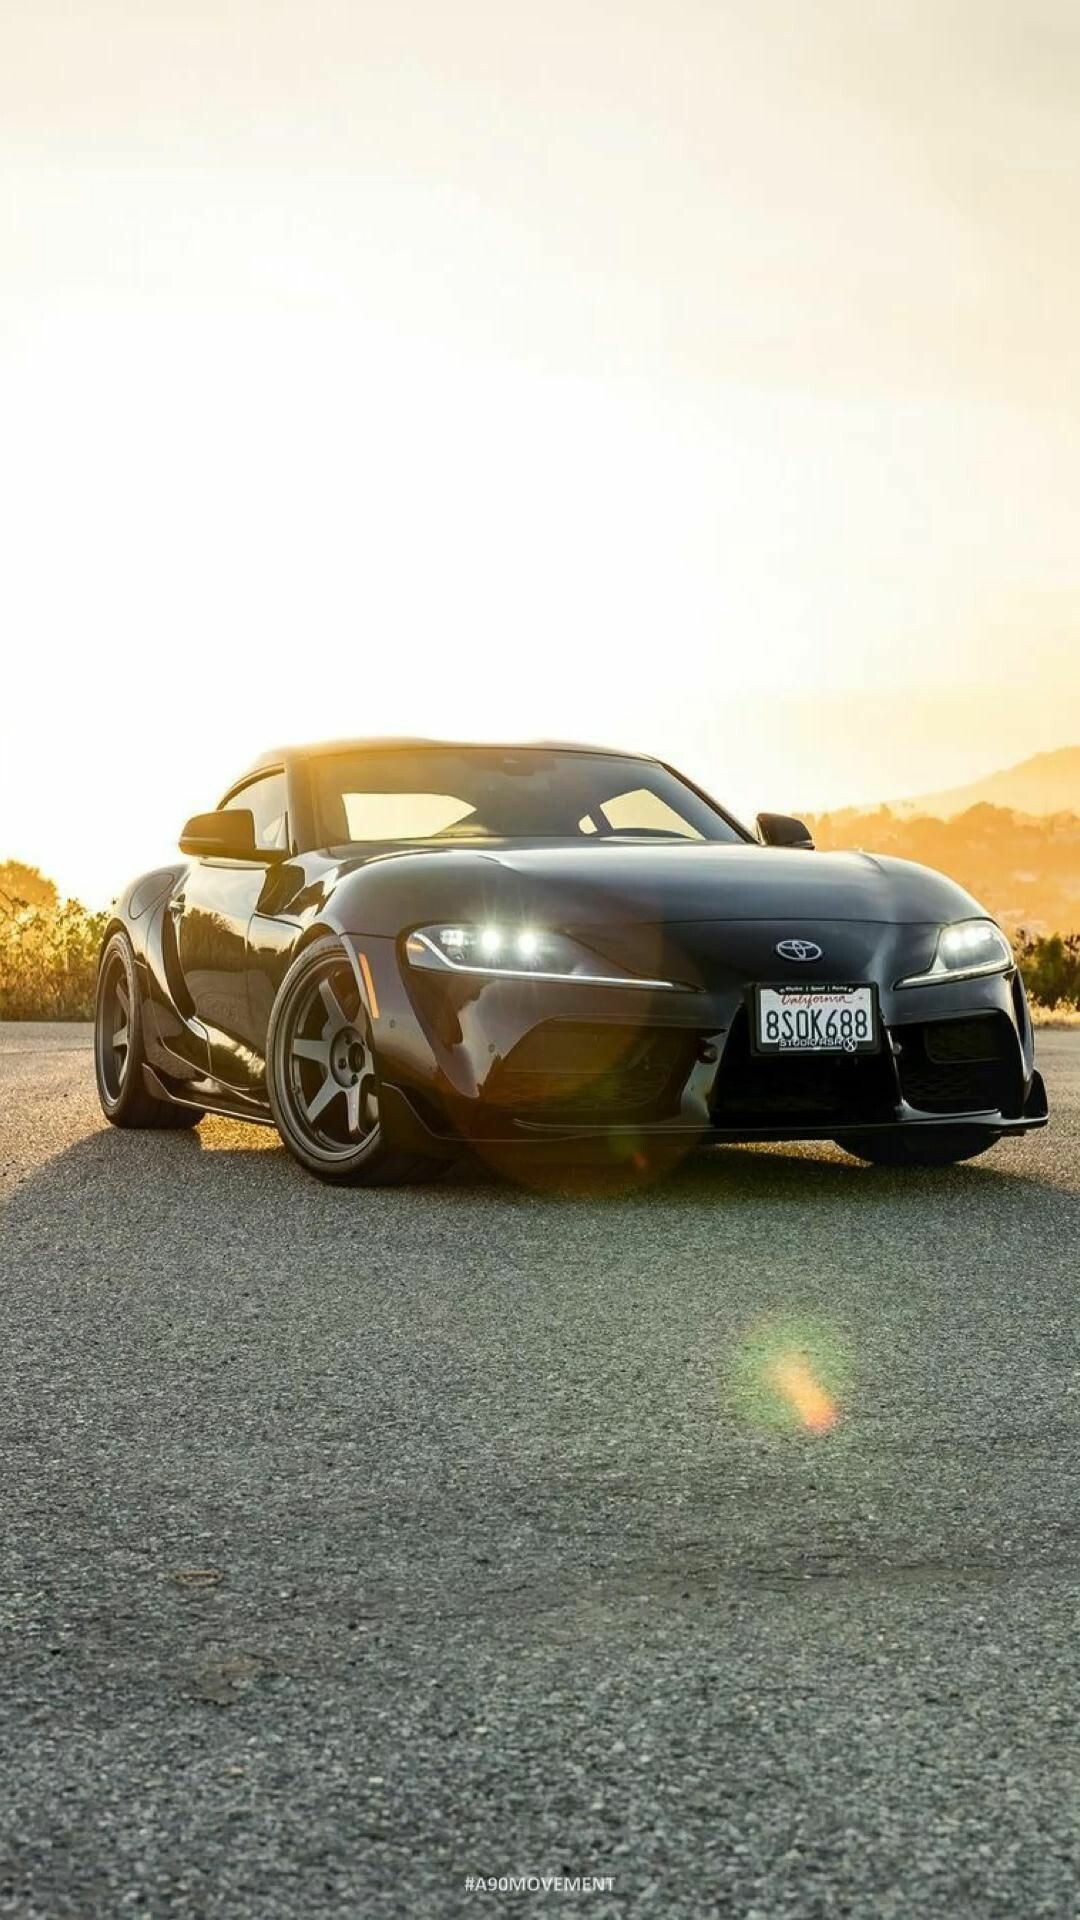 Toyota: Supra, Debuted in 1978 as a high-performance version of the sporty Celica. 1080x1920 Full HD Wallpaper.